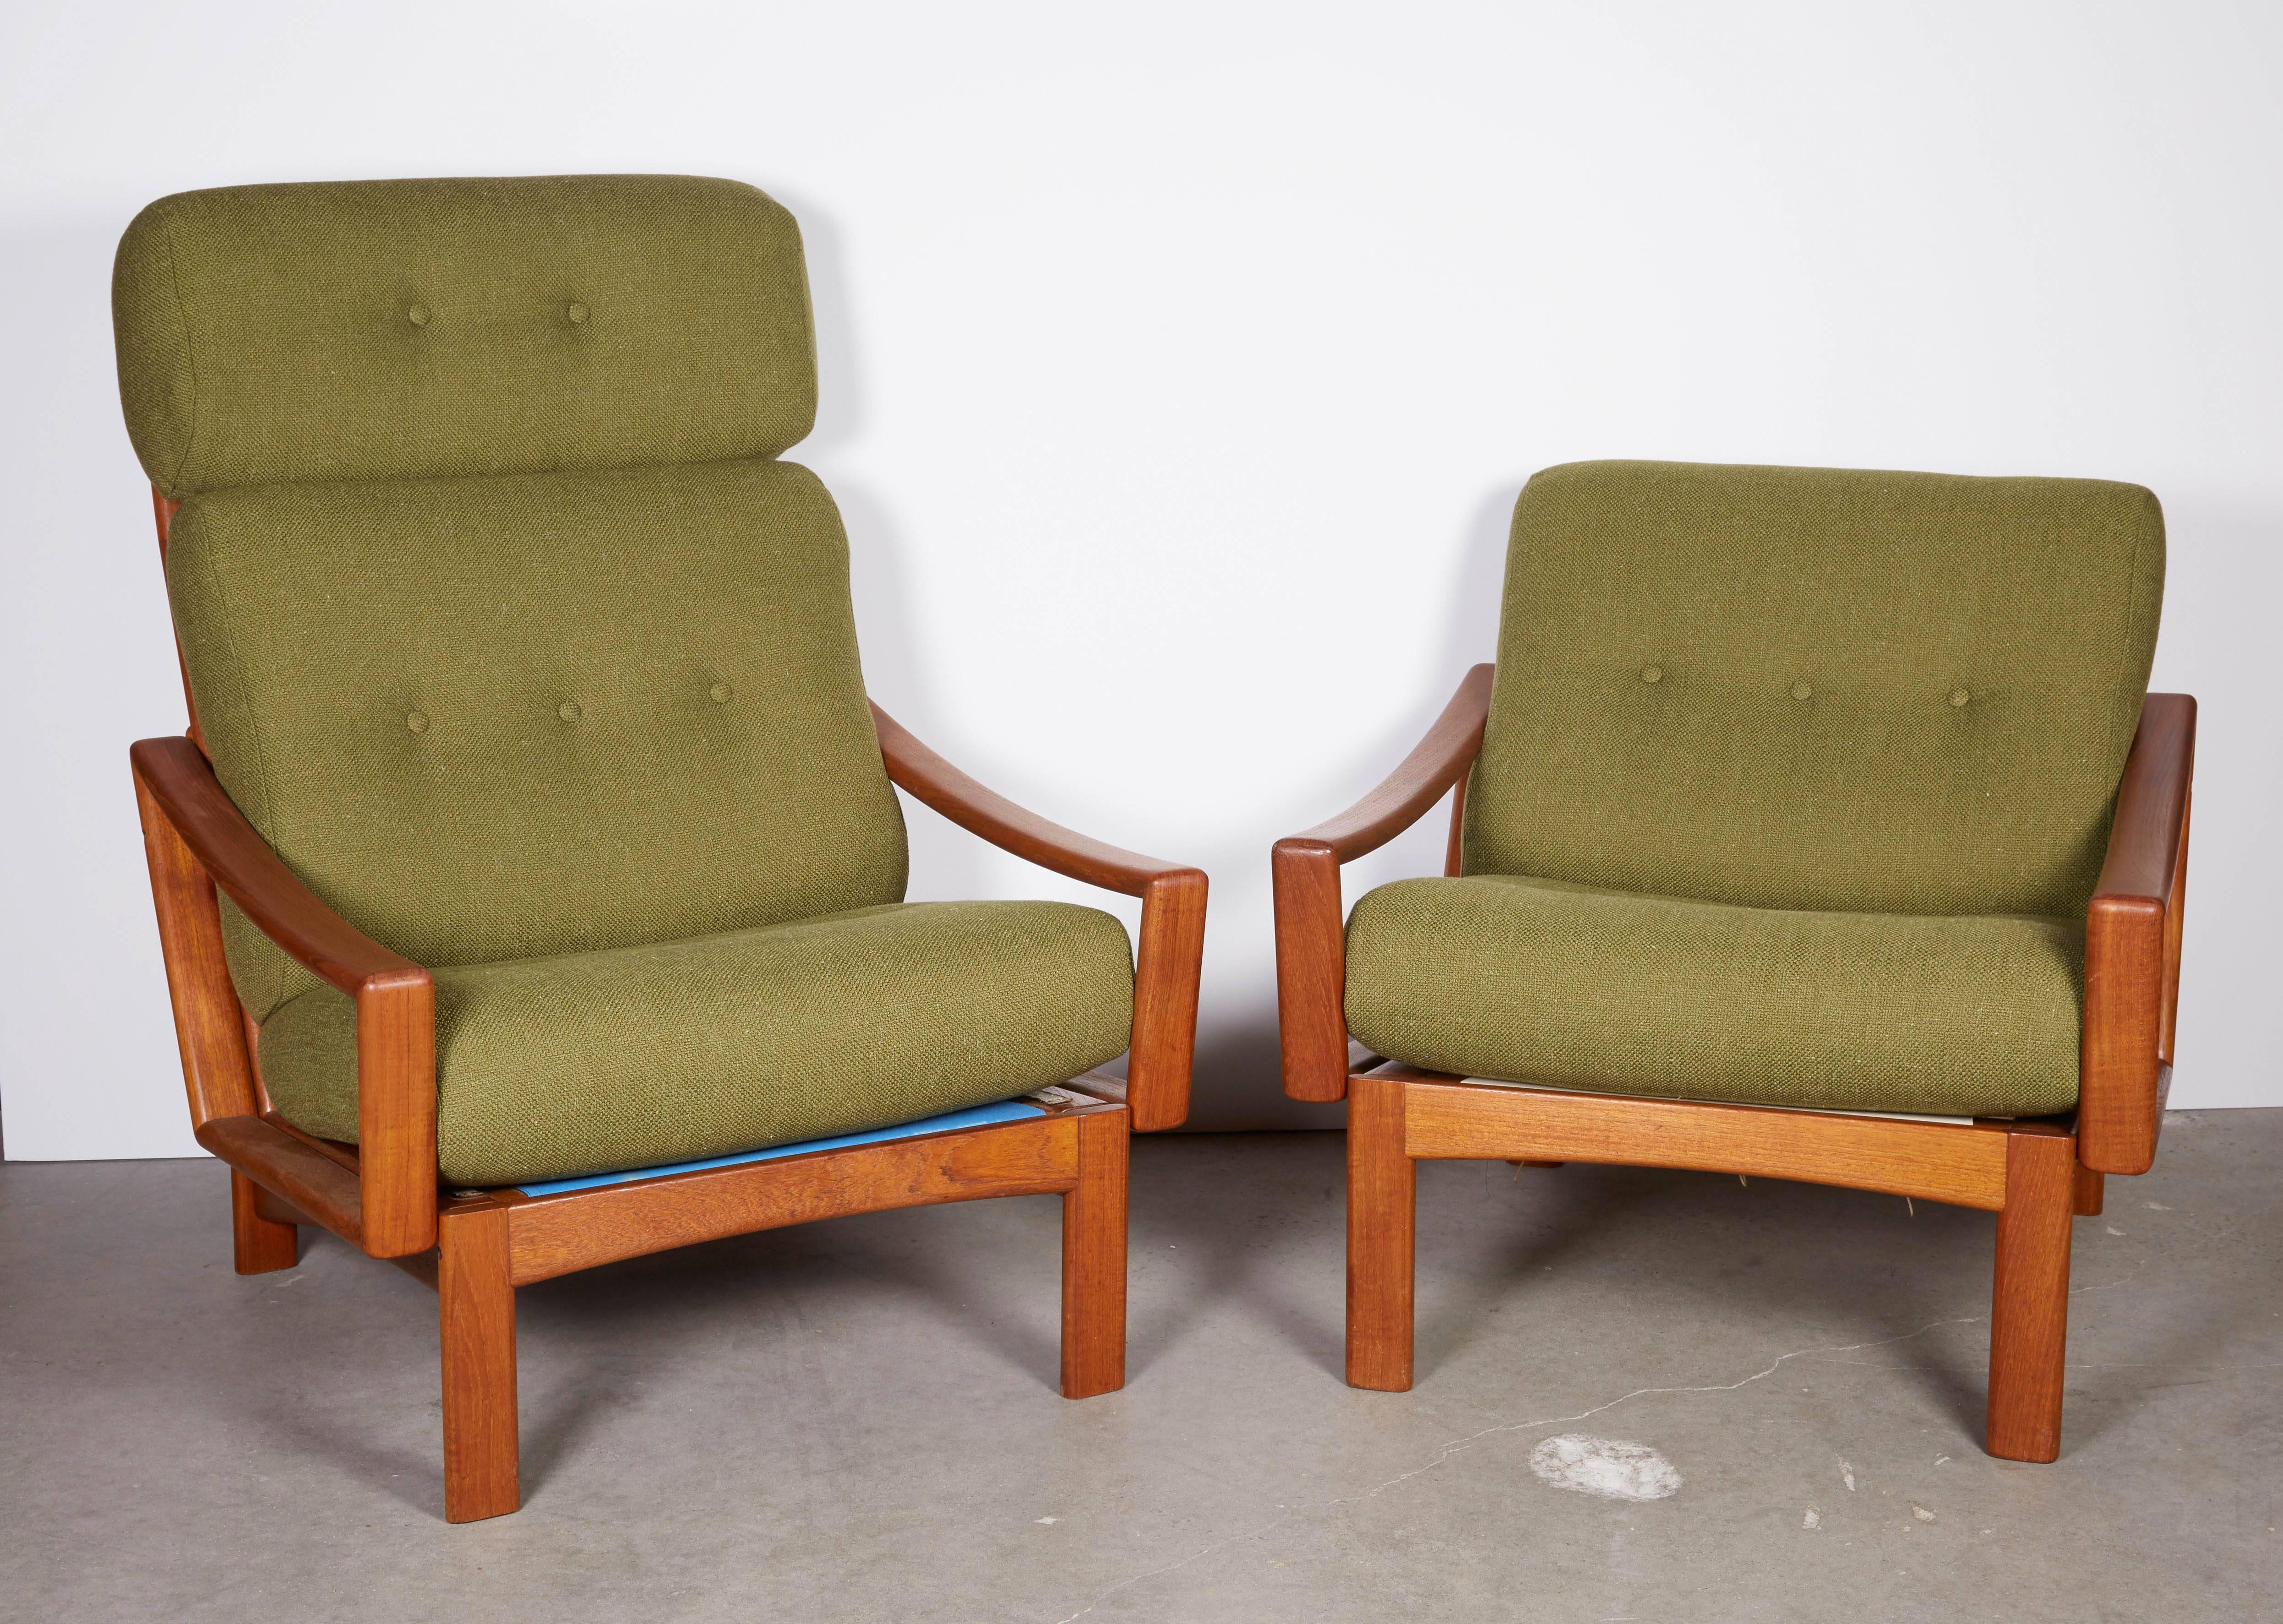 Danish 1960s Teak High Back Chair

This Modern lounge chair is in excellent condition. The cushions are this amazing shape that gives the best lumbar support I've ever experience. Newly upholstered, or send in your fabric you would like to see it